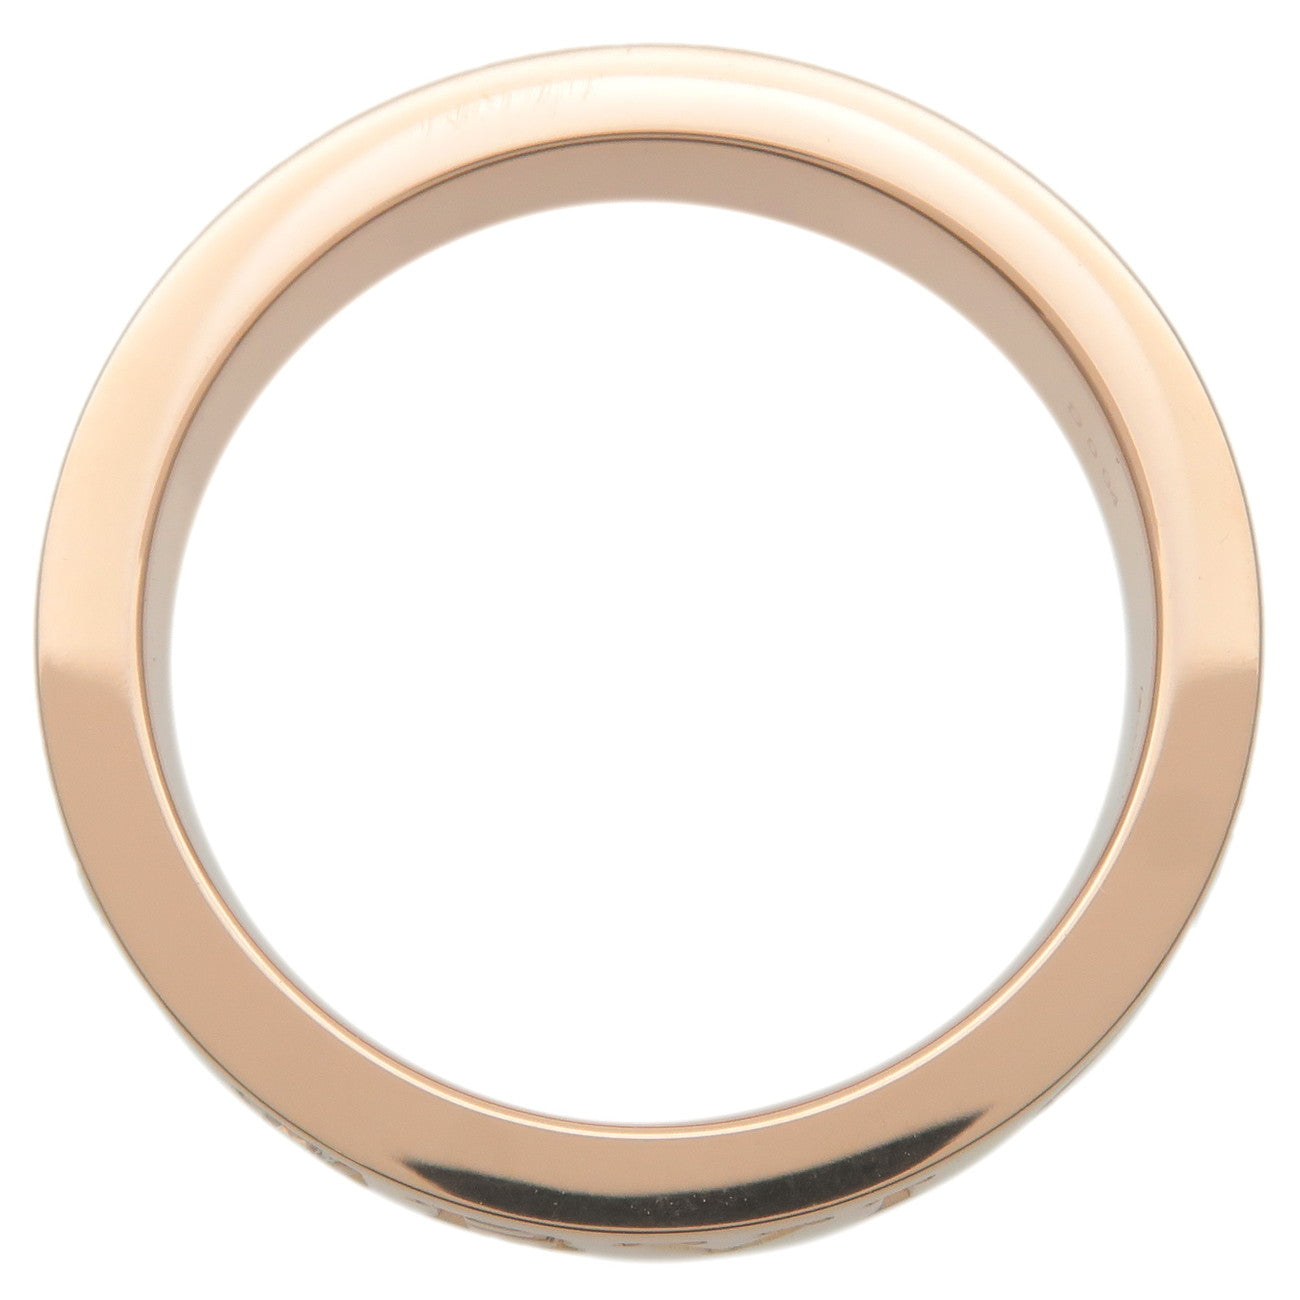 Gold Ring PNGs for Free Download